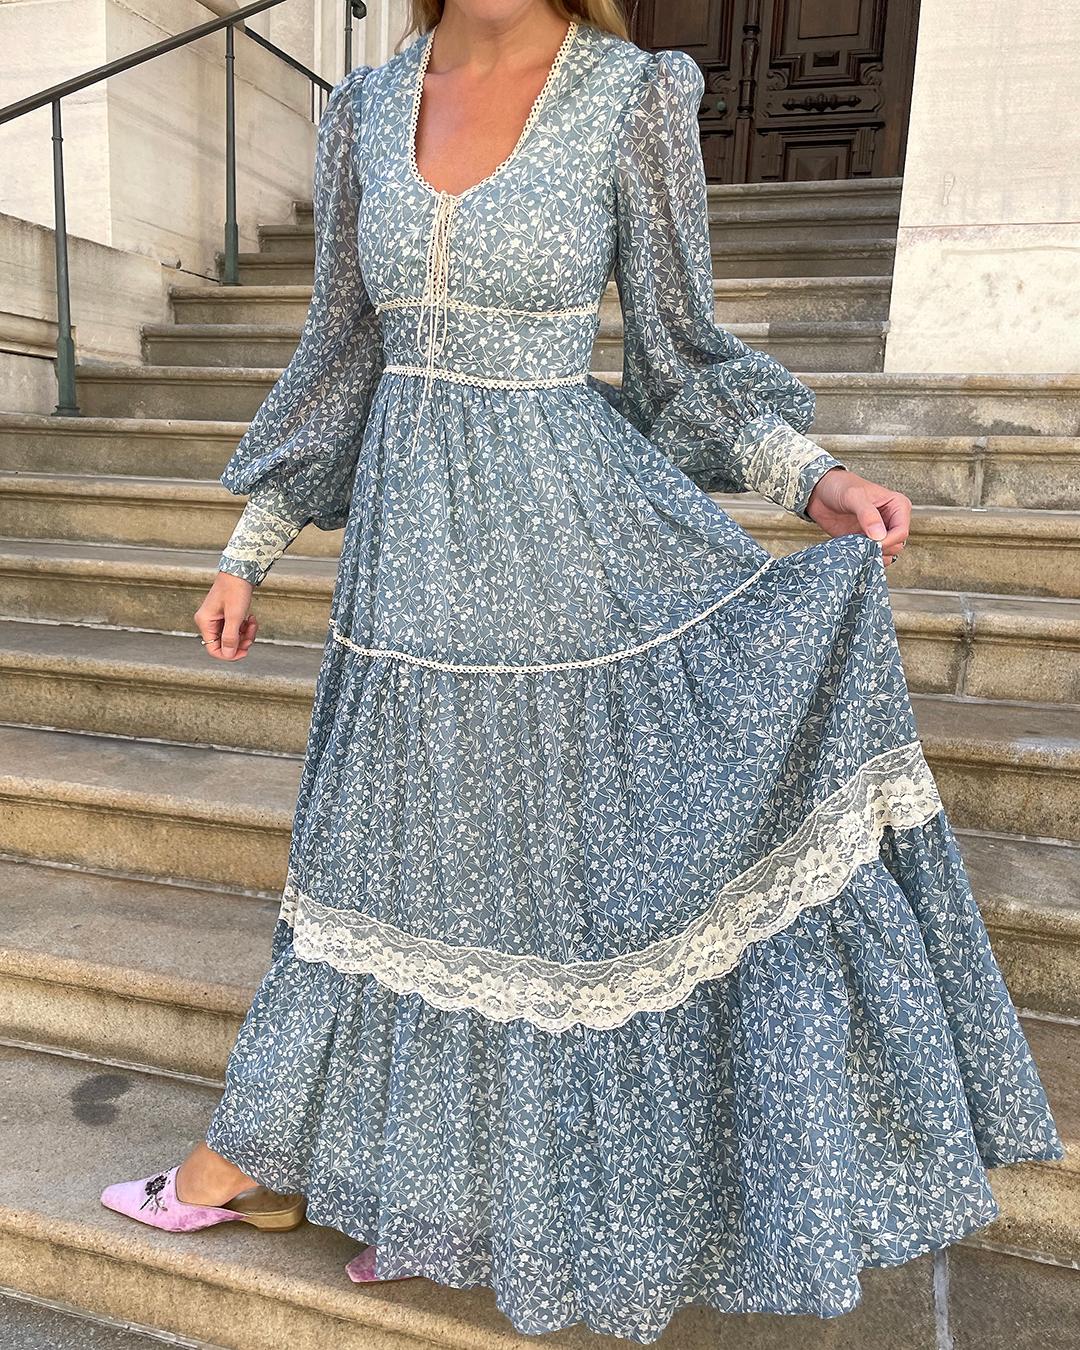 What dreams are made of! In the 1970s, Gunne Sax borrowed heavily from Victorian silhouettes, igniting an entire aesthetic that went on to define the style of an era. This dress is a beautiful example: its crafted from gorgeous sheer floral voile,